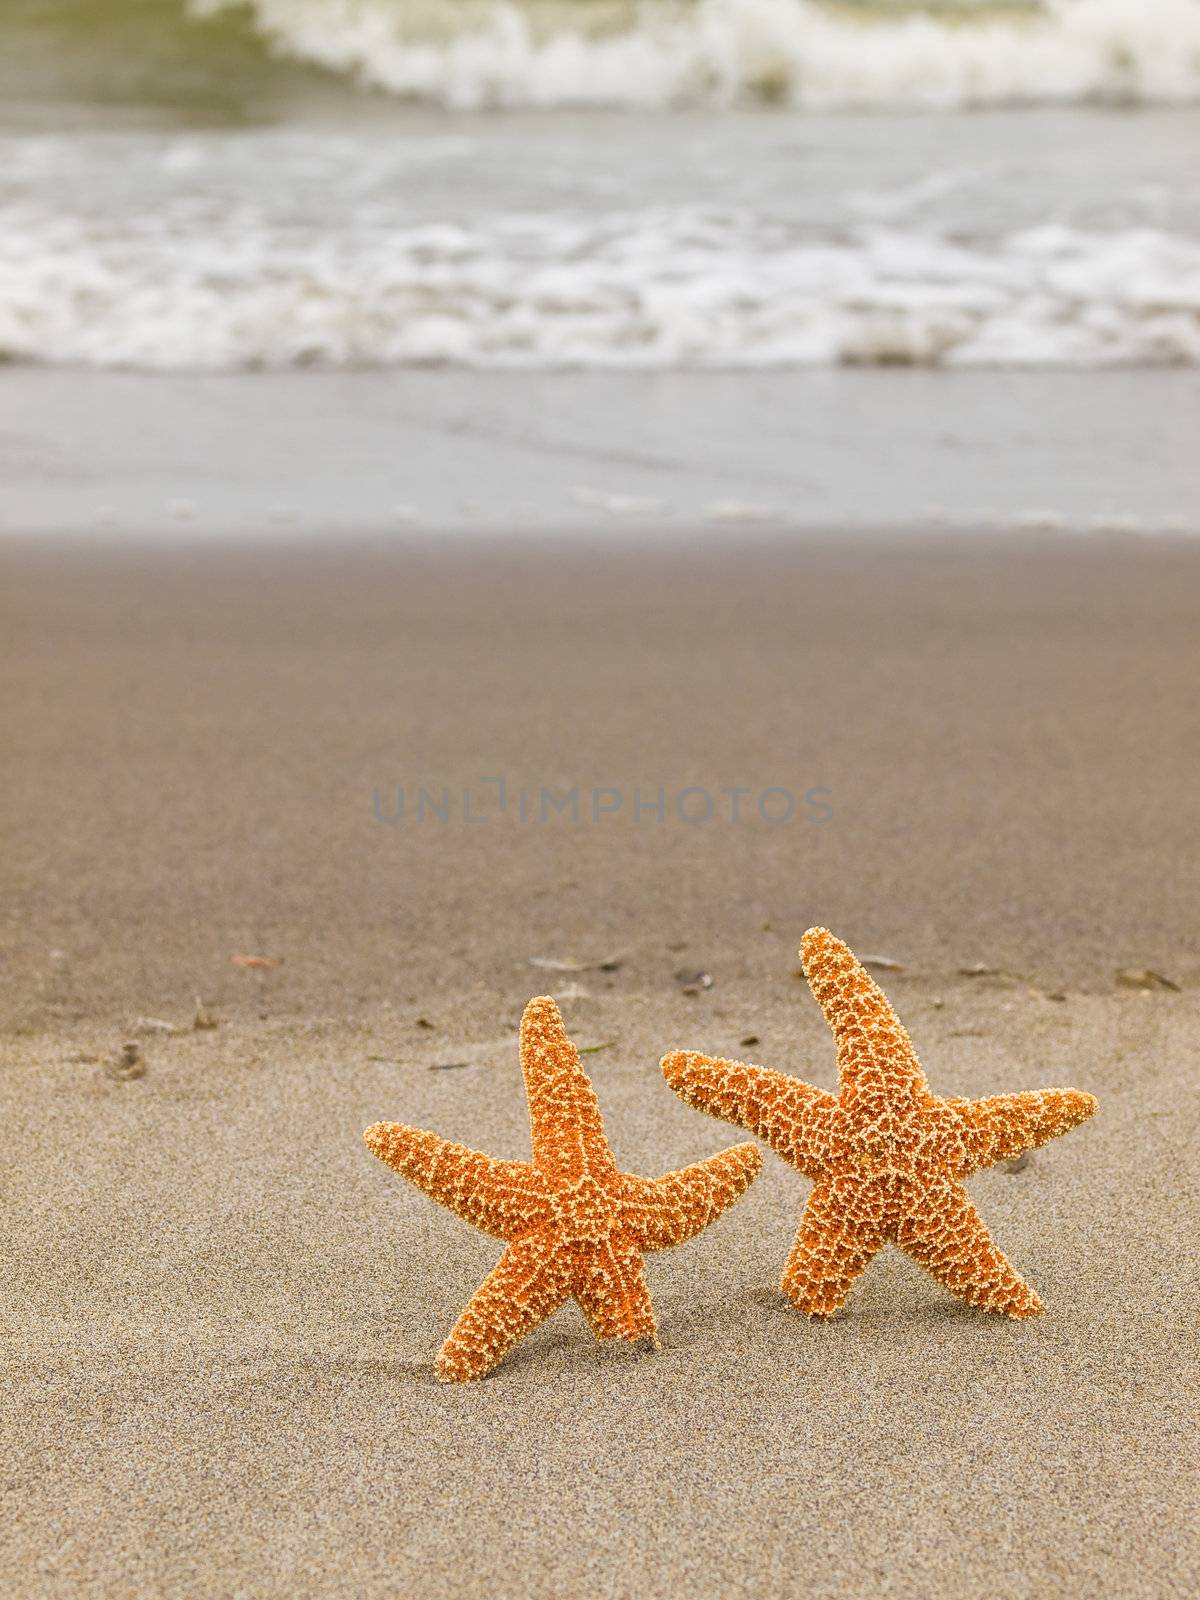 Two Starfish on the Shoreline with Waves in the Background